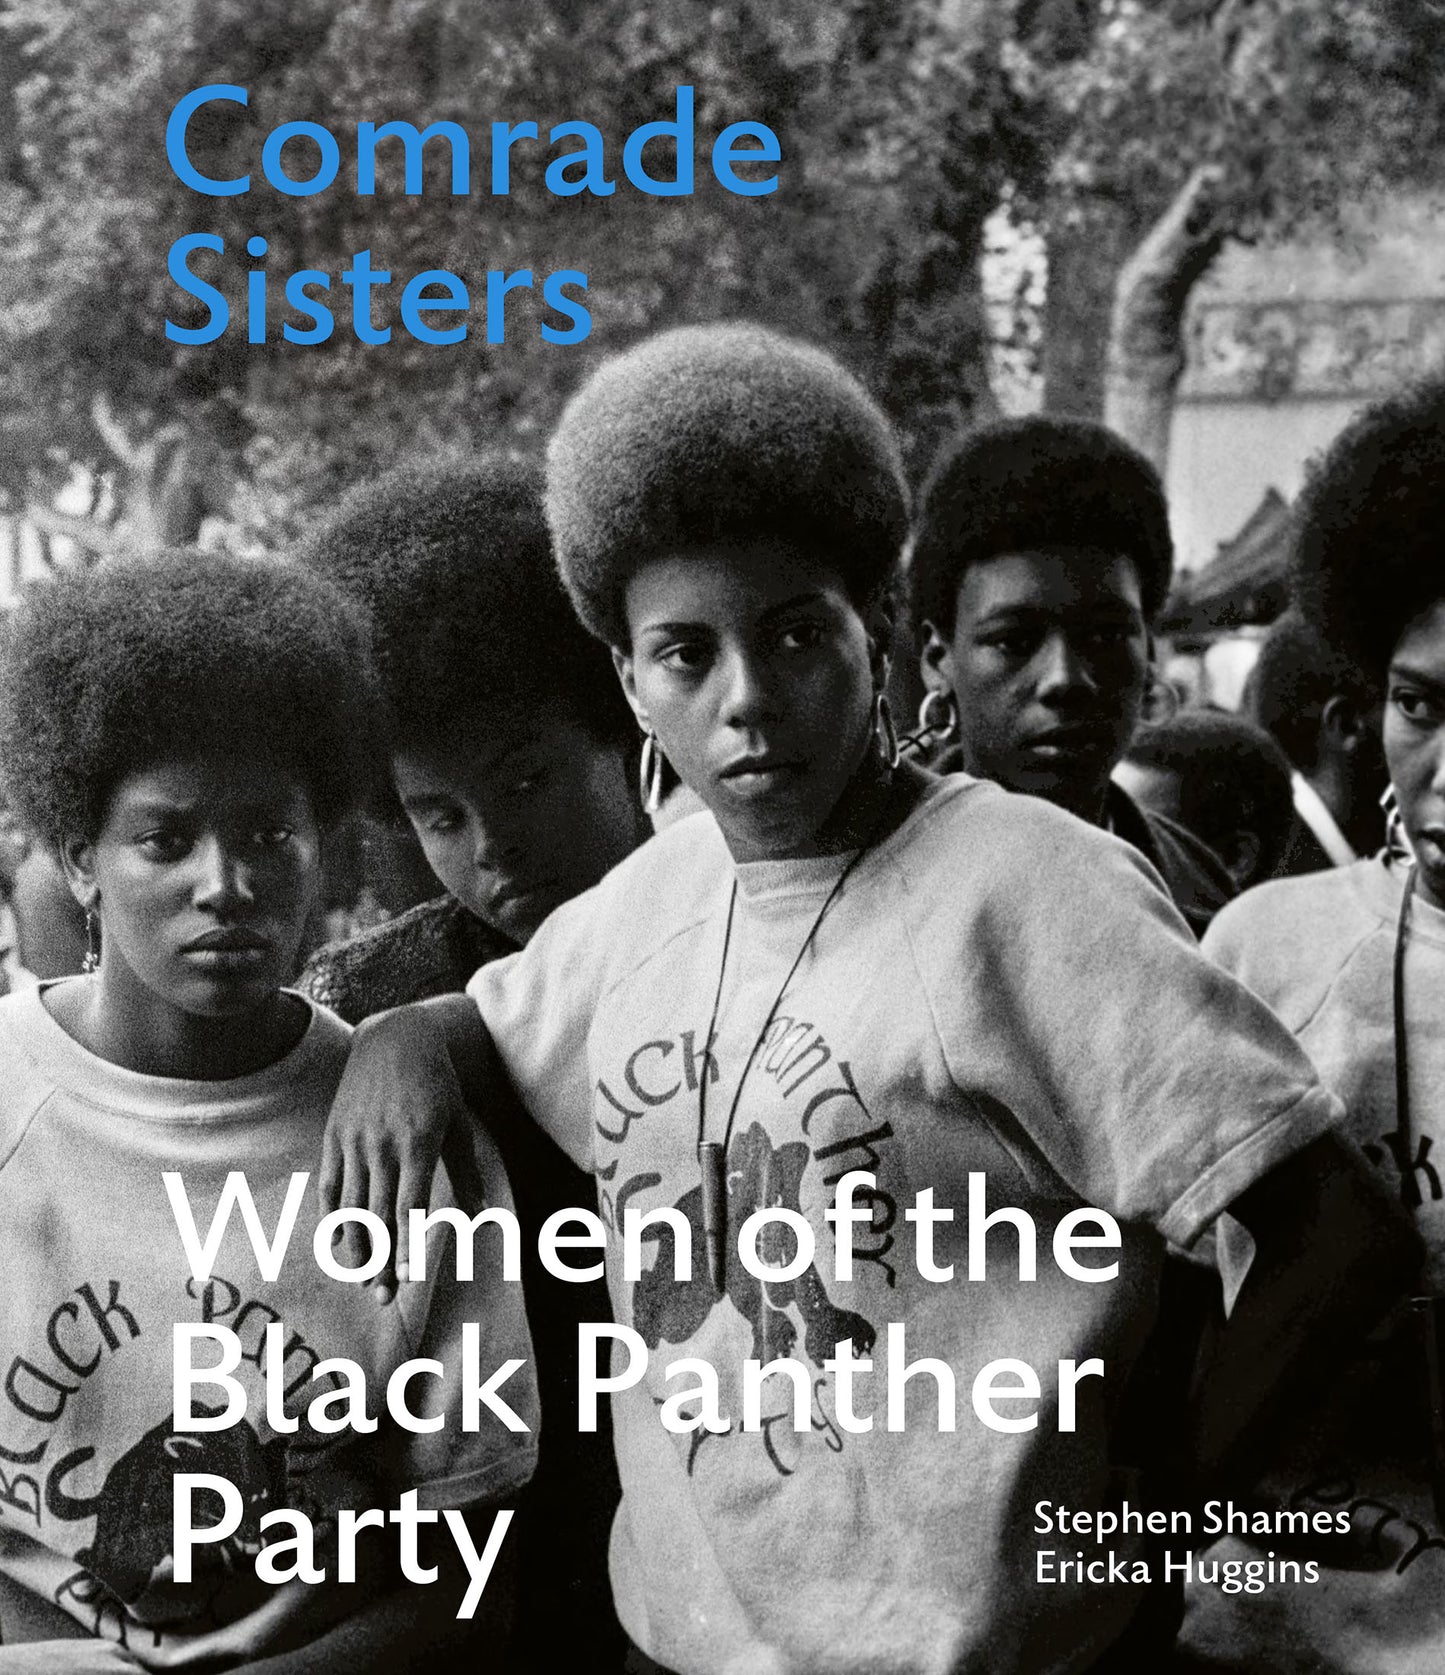 Comrade Sisters: Women of the Black Panther Party Photobook (Shames and huggins, 2022)